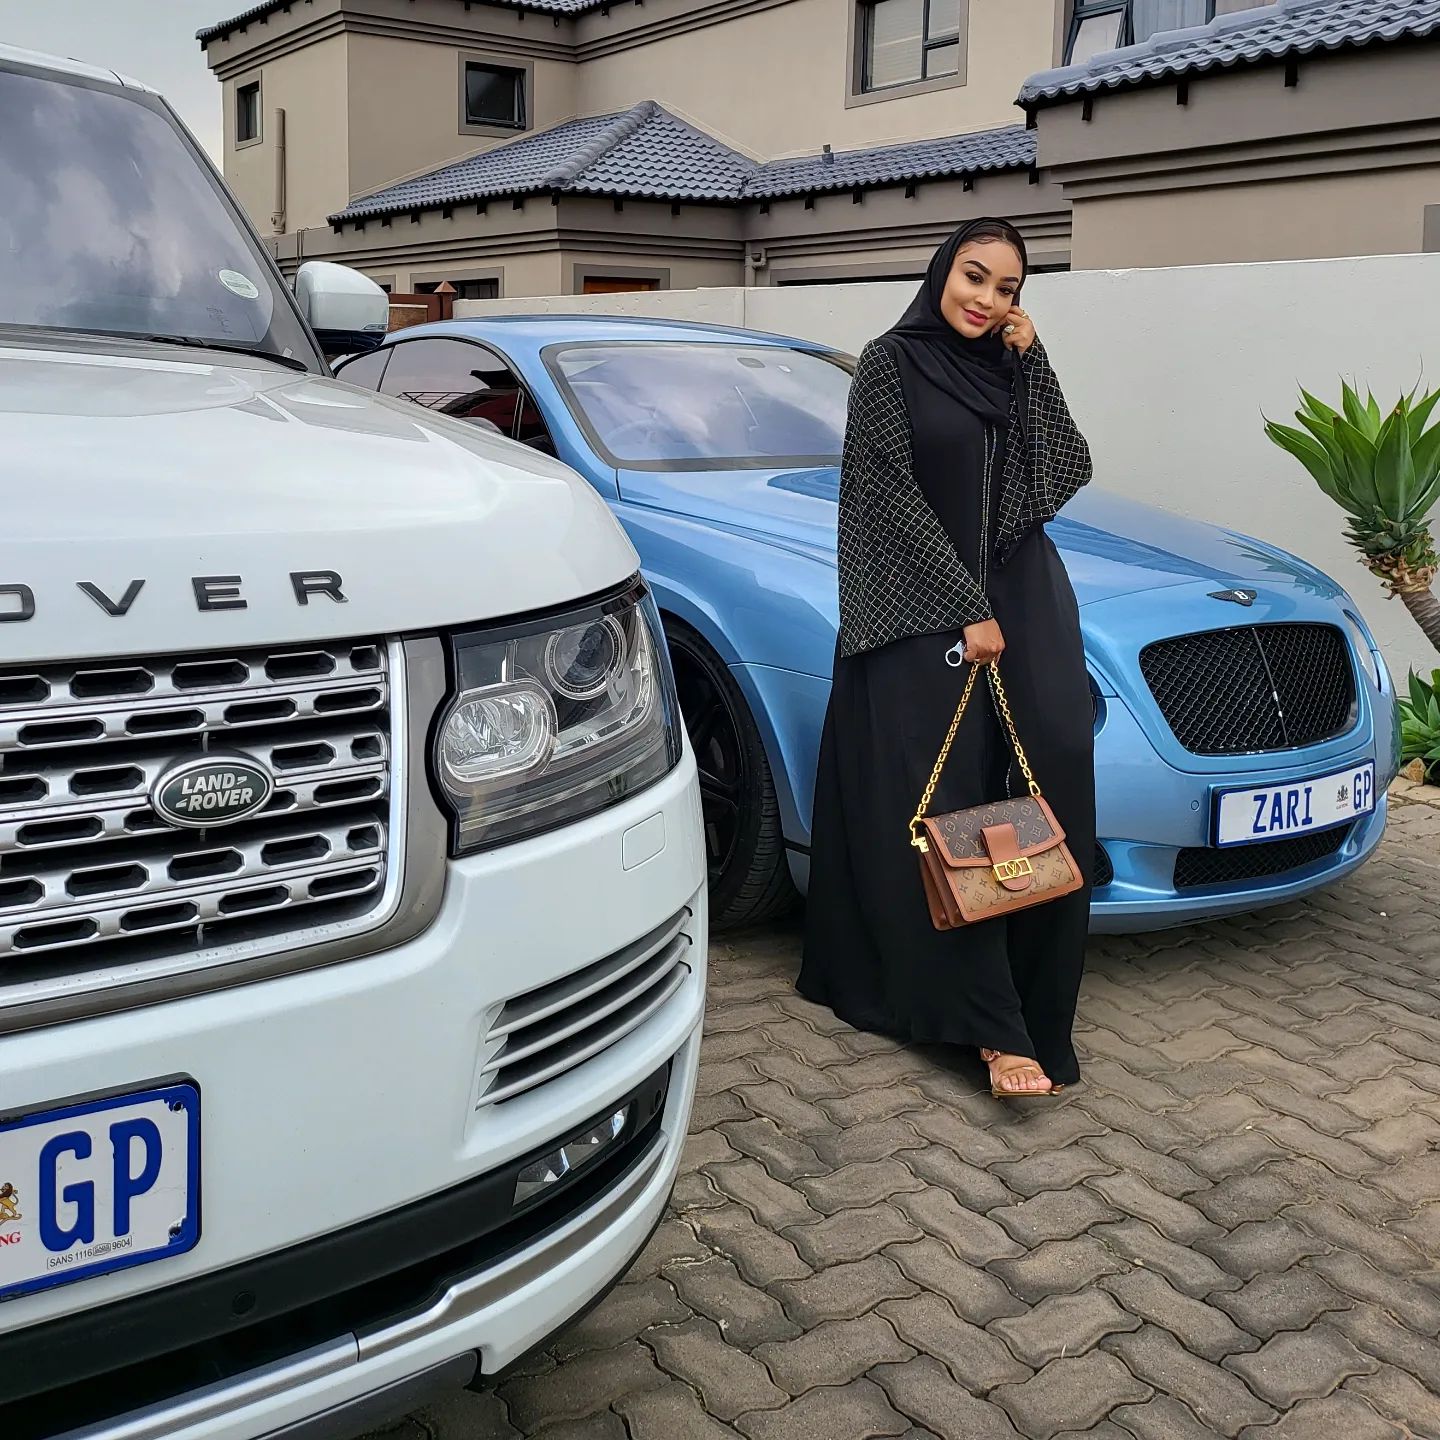 Zari Hassan Comes Clean About How She Makes Money 